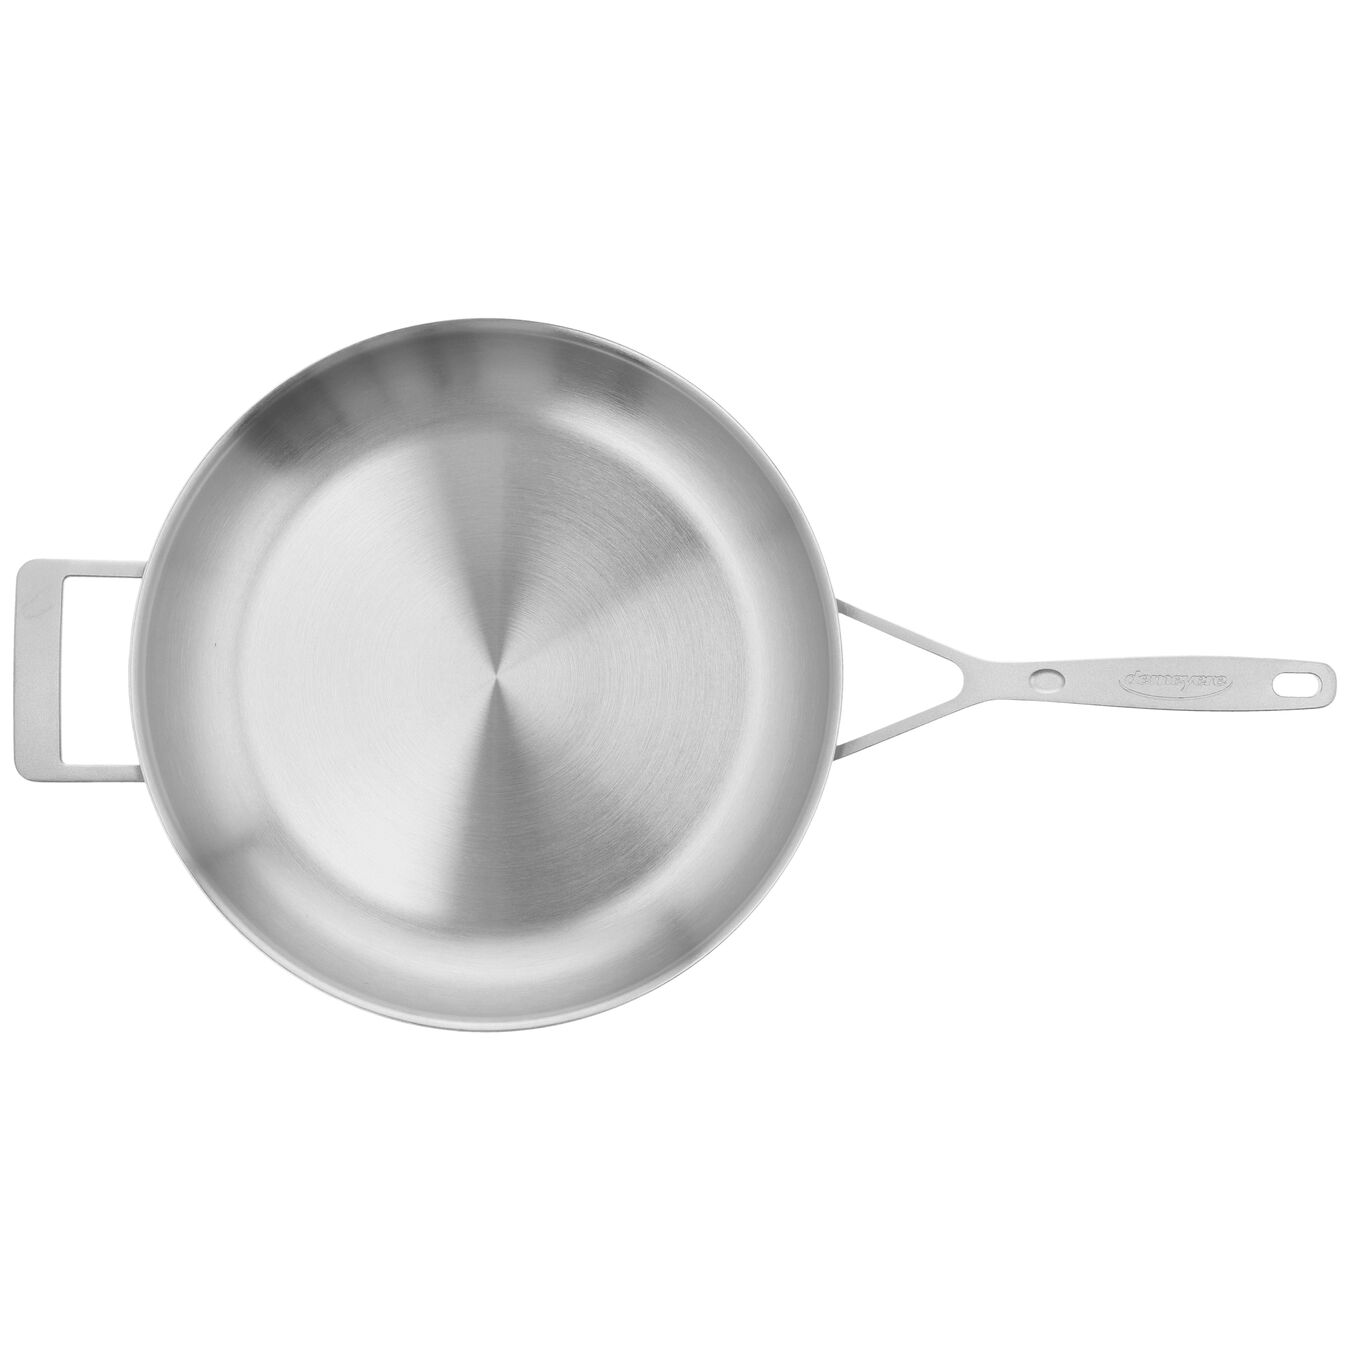 12.5-inch, 18/10 Stainless Steel, Fry Pan with Helper Handle,,large 2